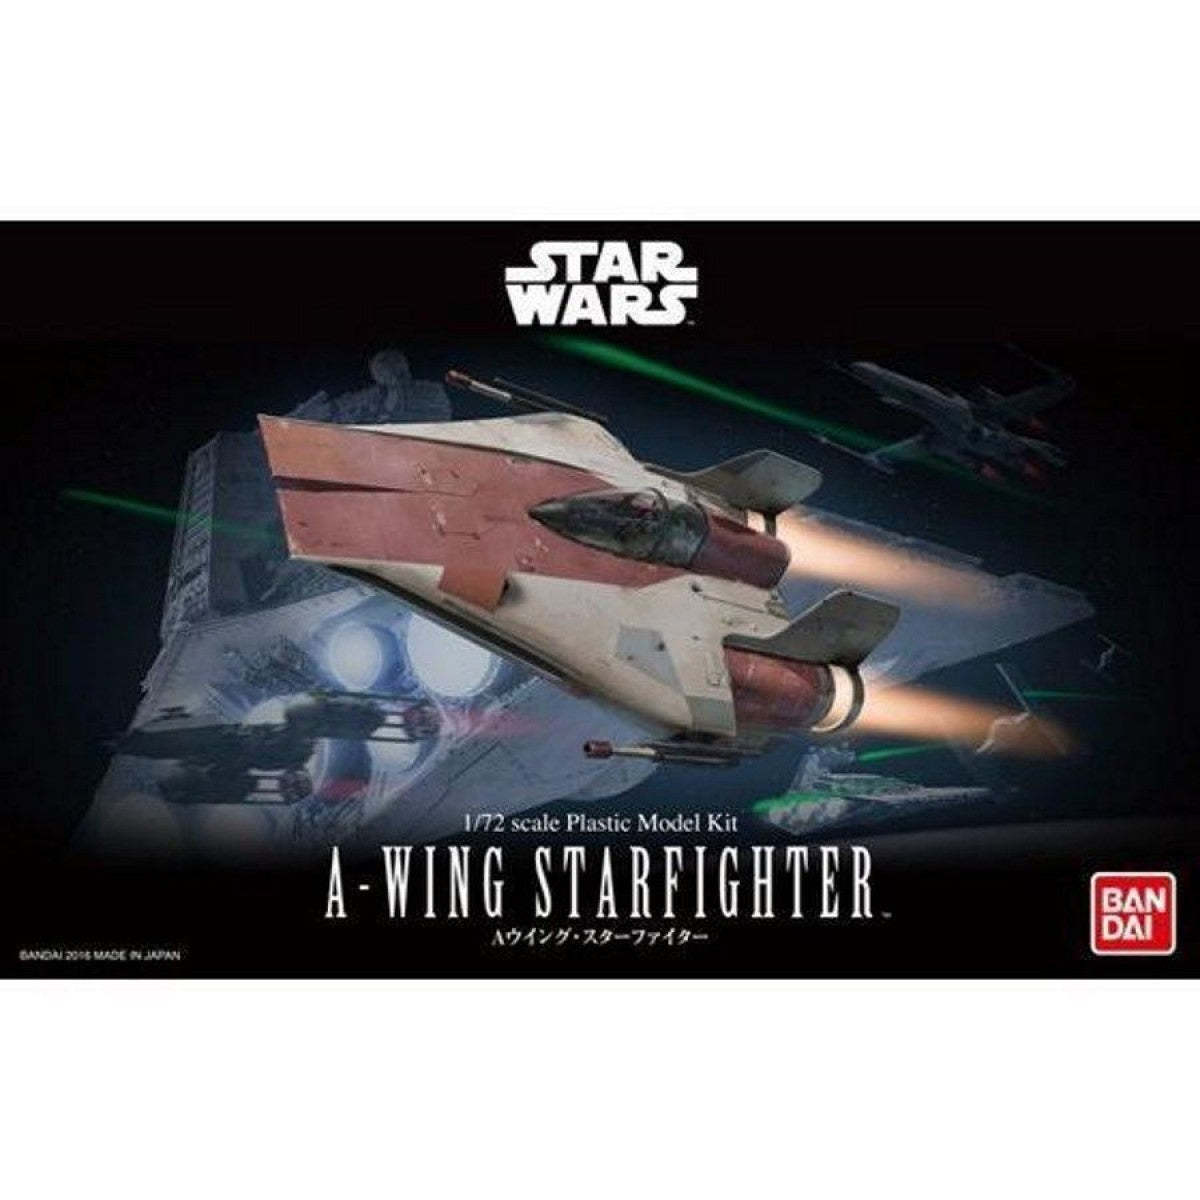 STAR WARS - 1/72 HOBBY KIT -  A-WING STARFIGHTER **Pre-Order**